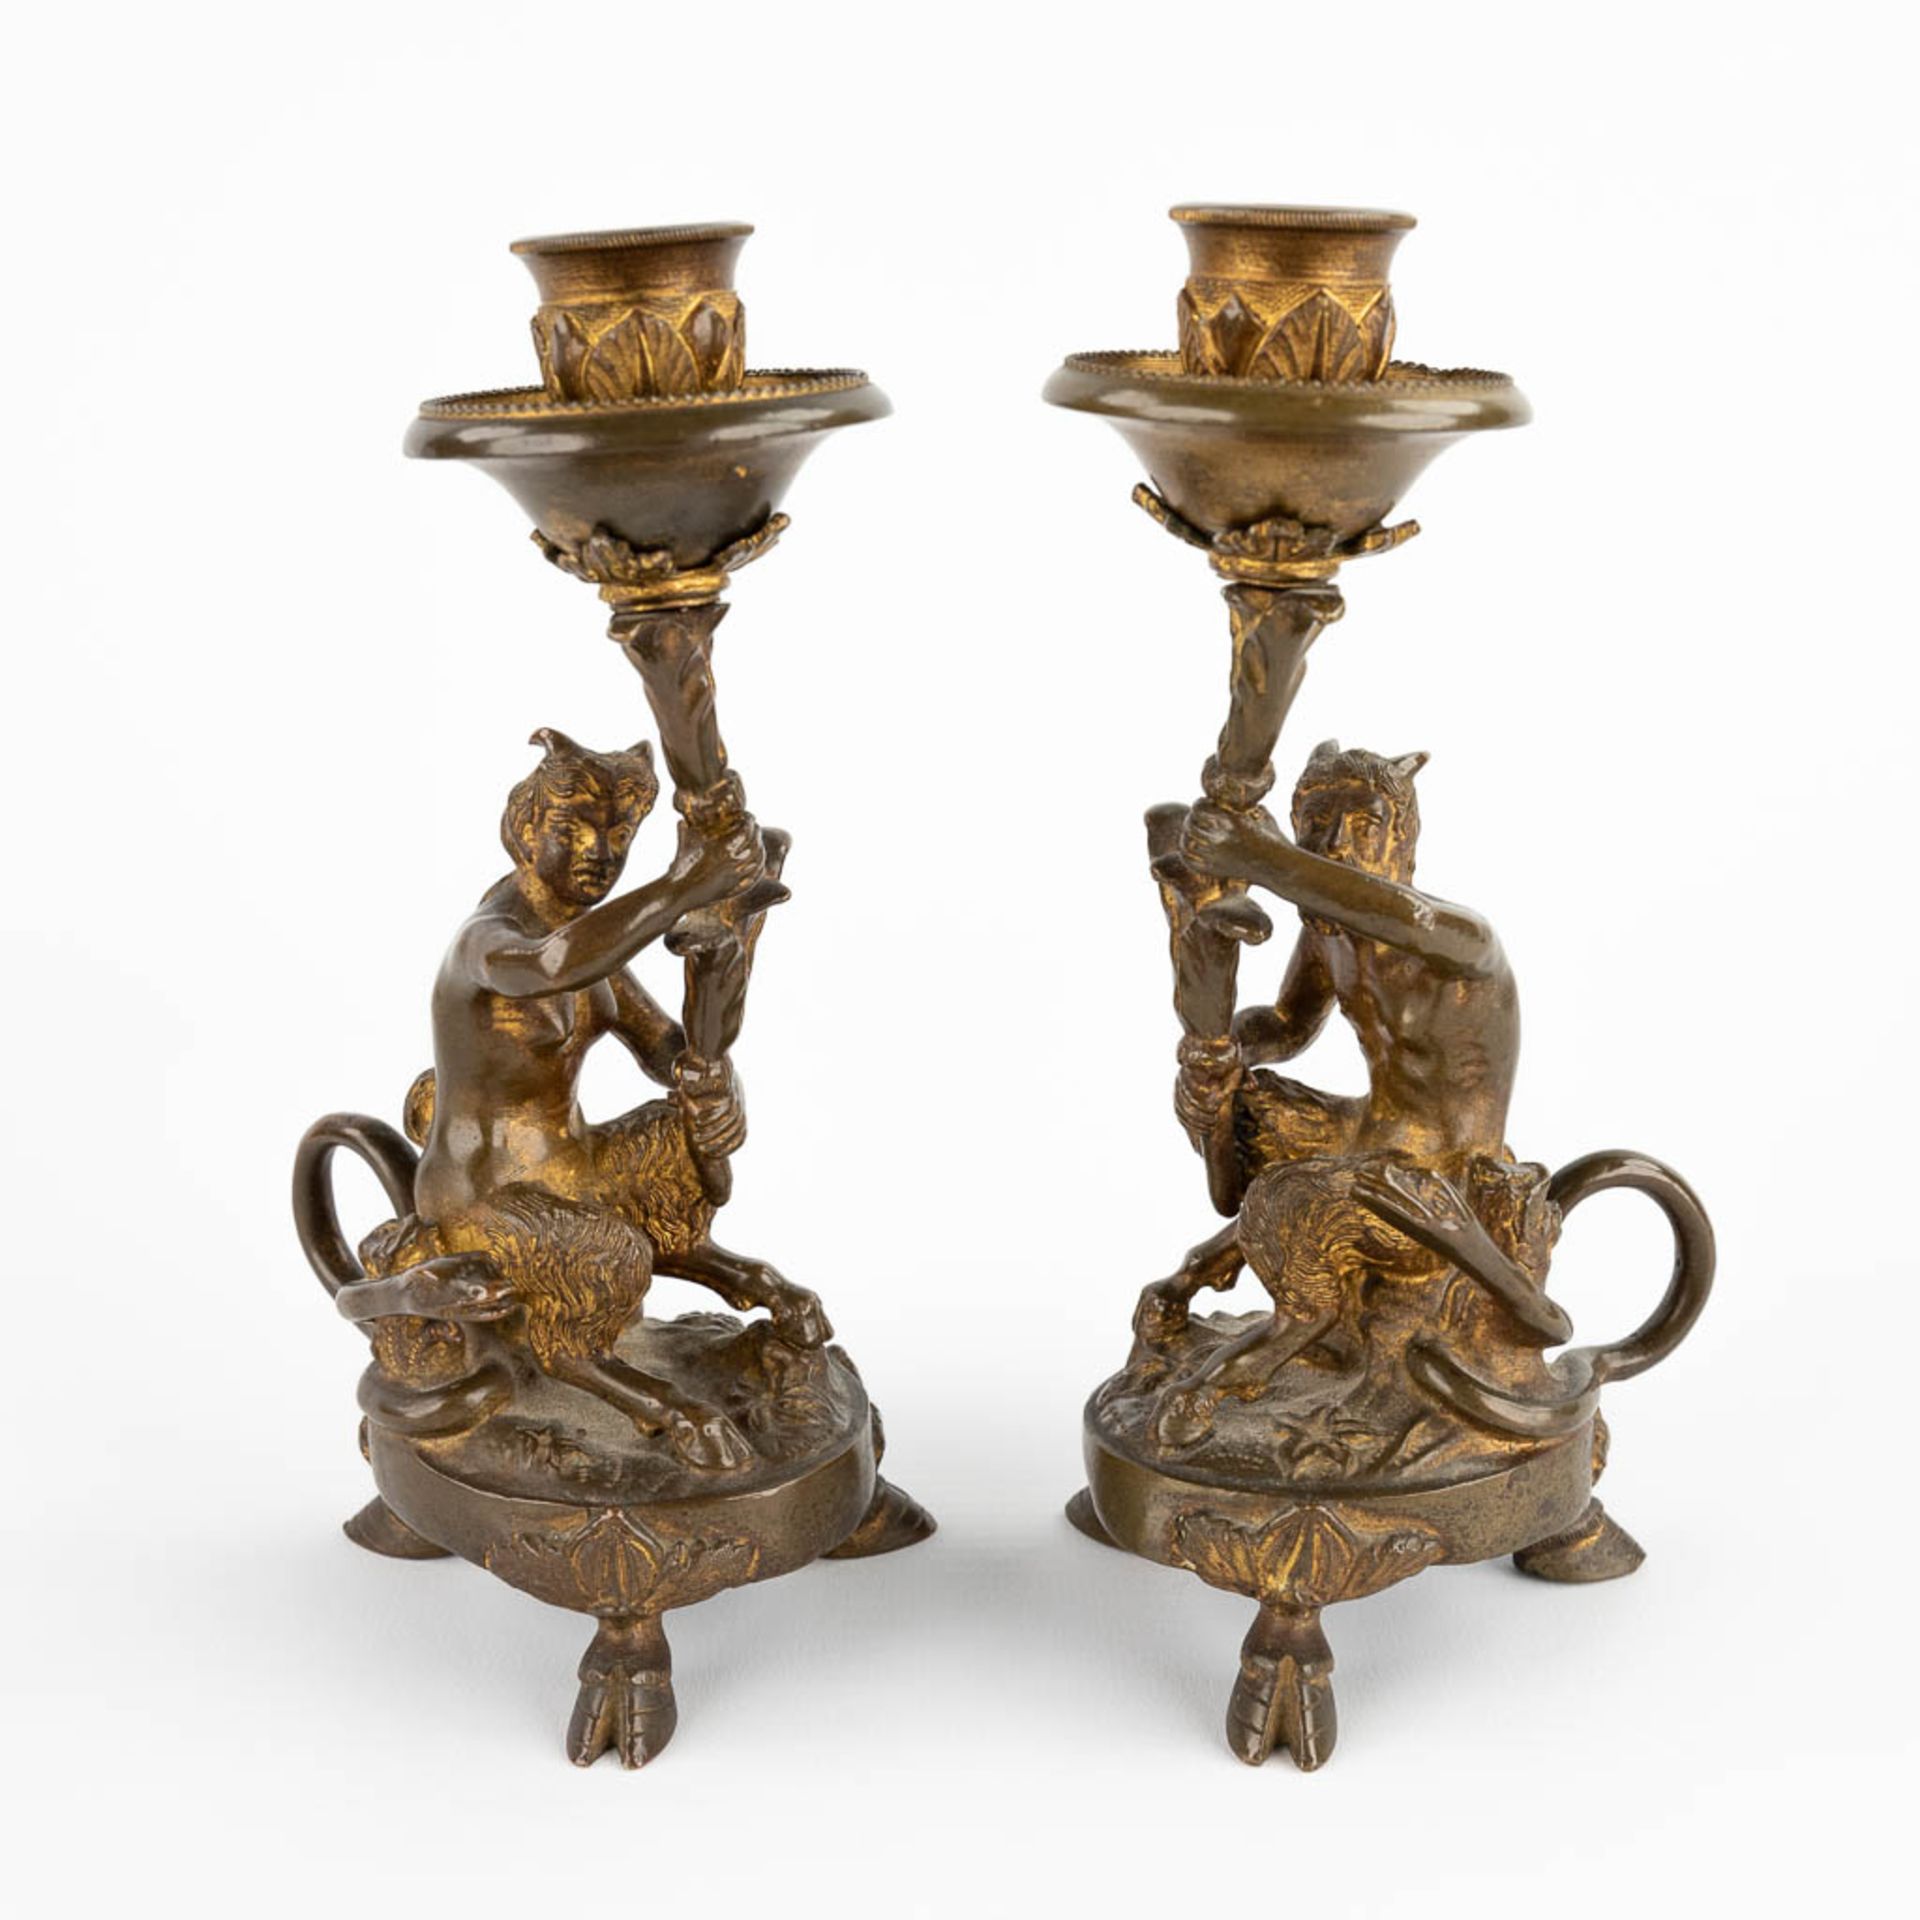 A pair of candlesticks with Satyr figurines, gilt bronze. 19th C. (D:7 x W:10 x H:17,5 cm)